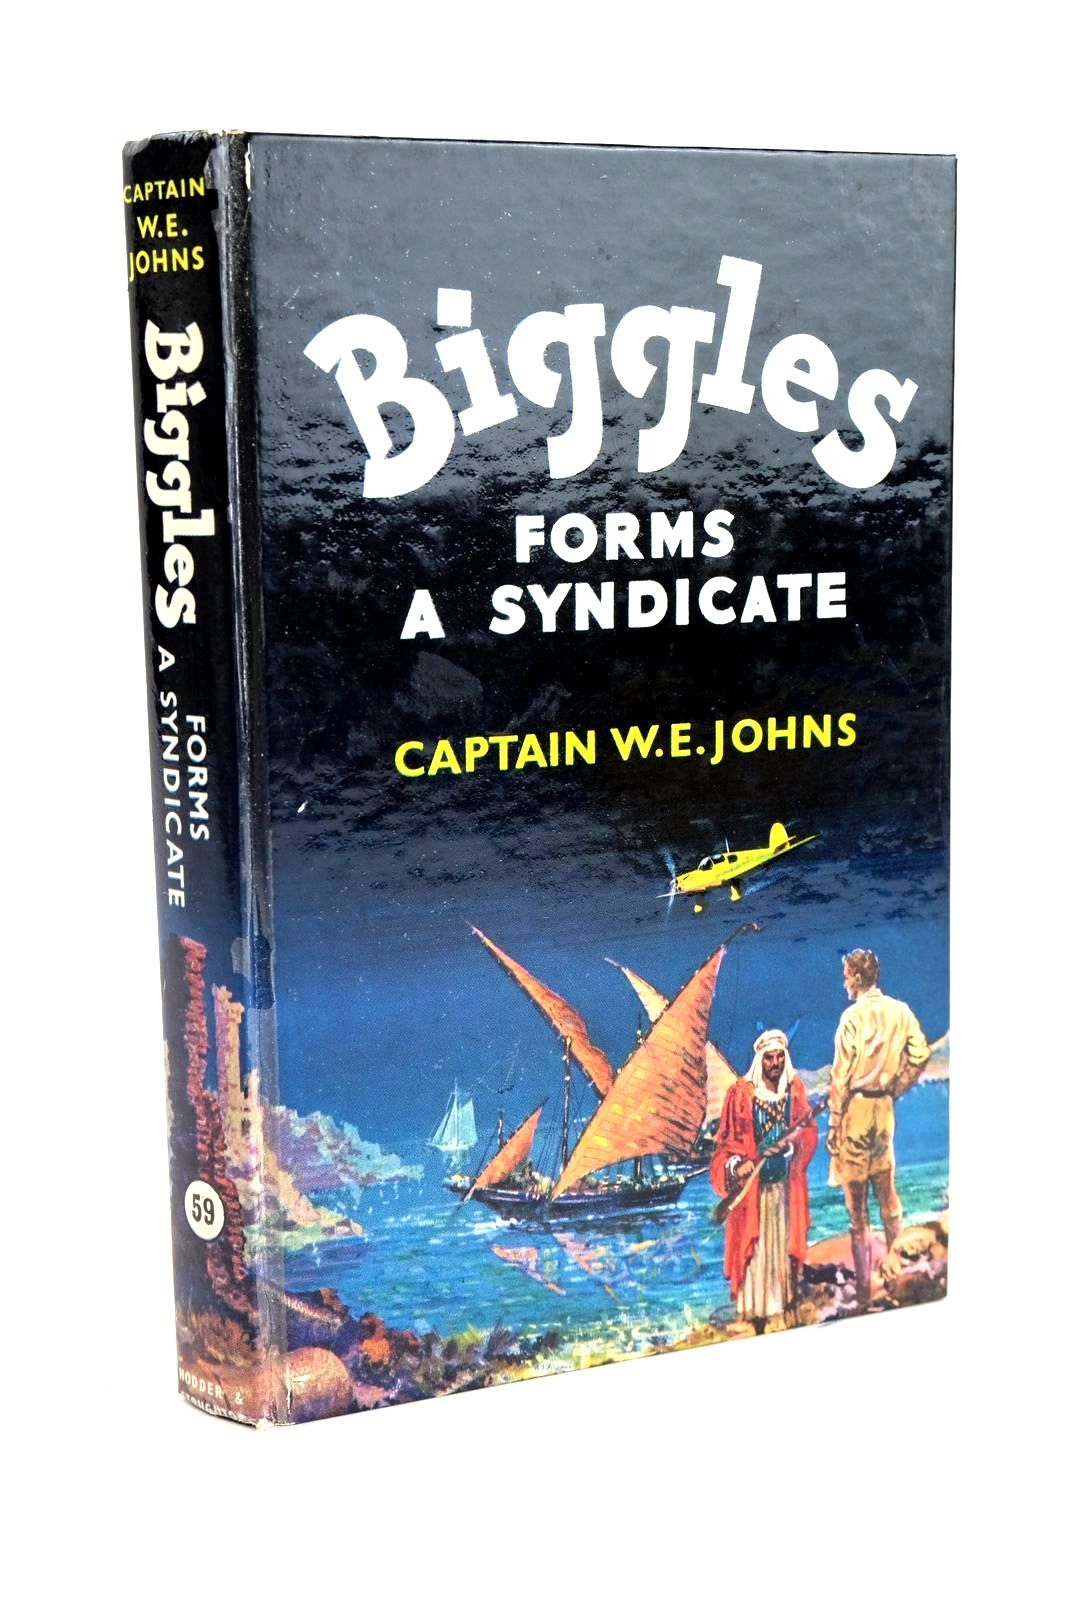 Photo of BIGGLES FORMS A SYNDICATE written by Johns, W.E. illustrated by Stead,  published by Hodder &amp; Stoughton (STOCK CODE: 1327978)  for sale by Stella & Rose's Books